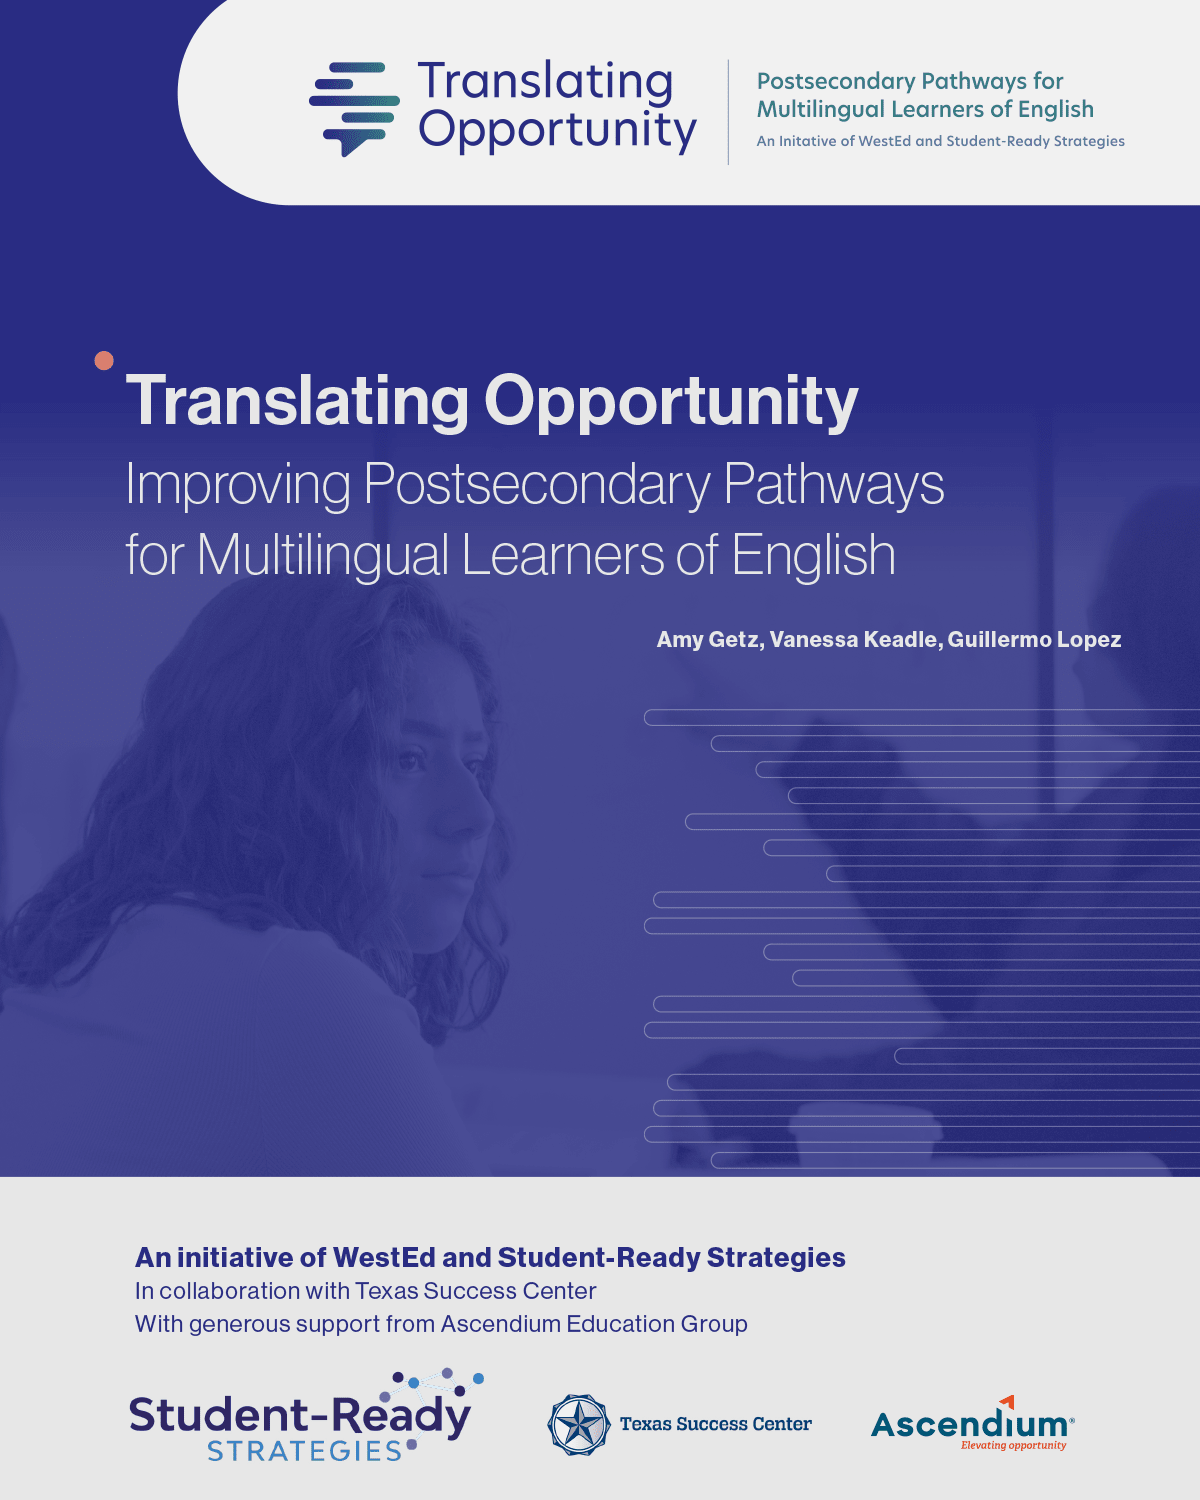 Translating Opportunity: Improving Postsecondary Pathways for Multilingual Learners of English 